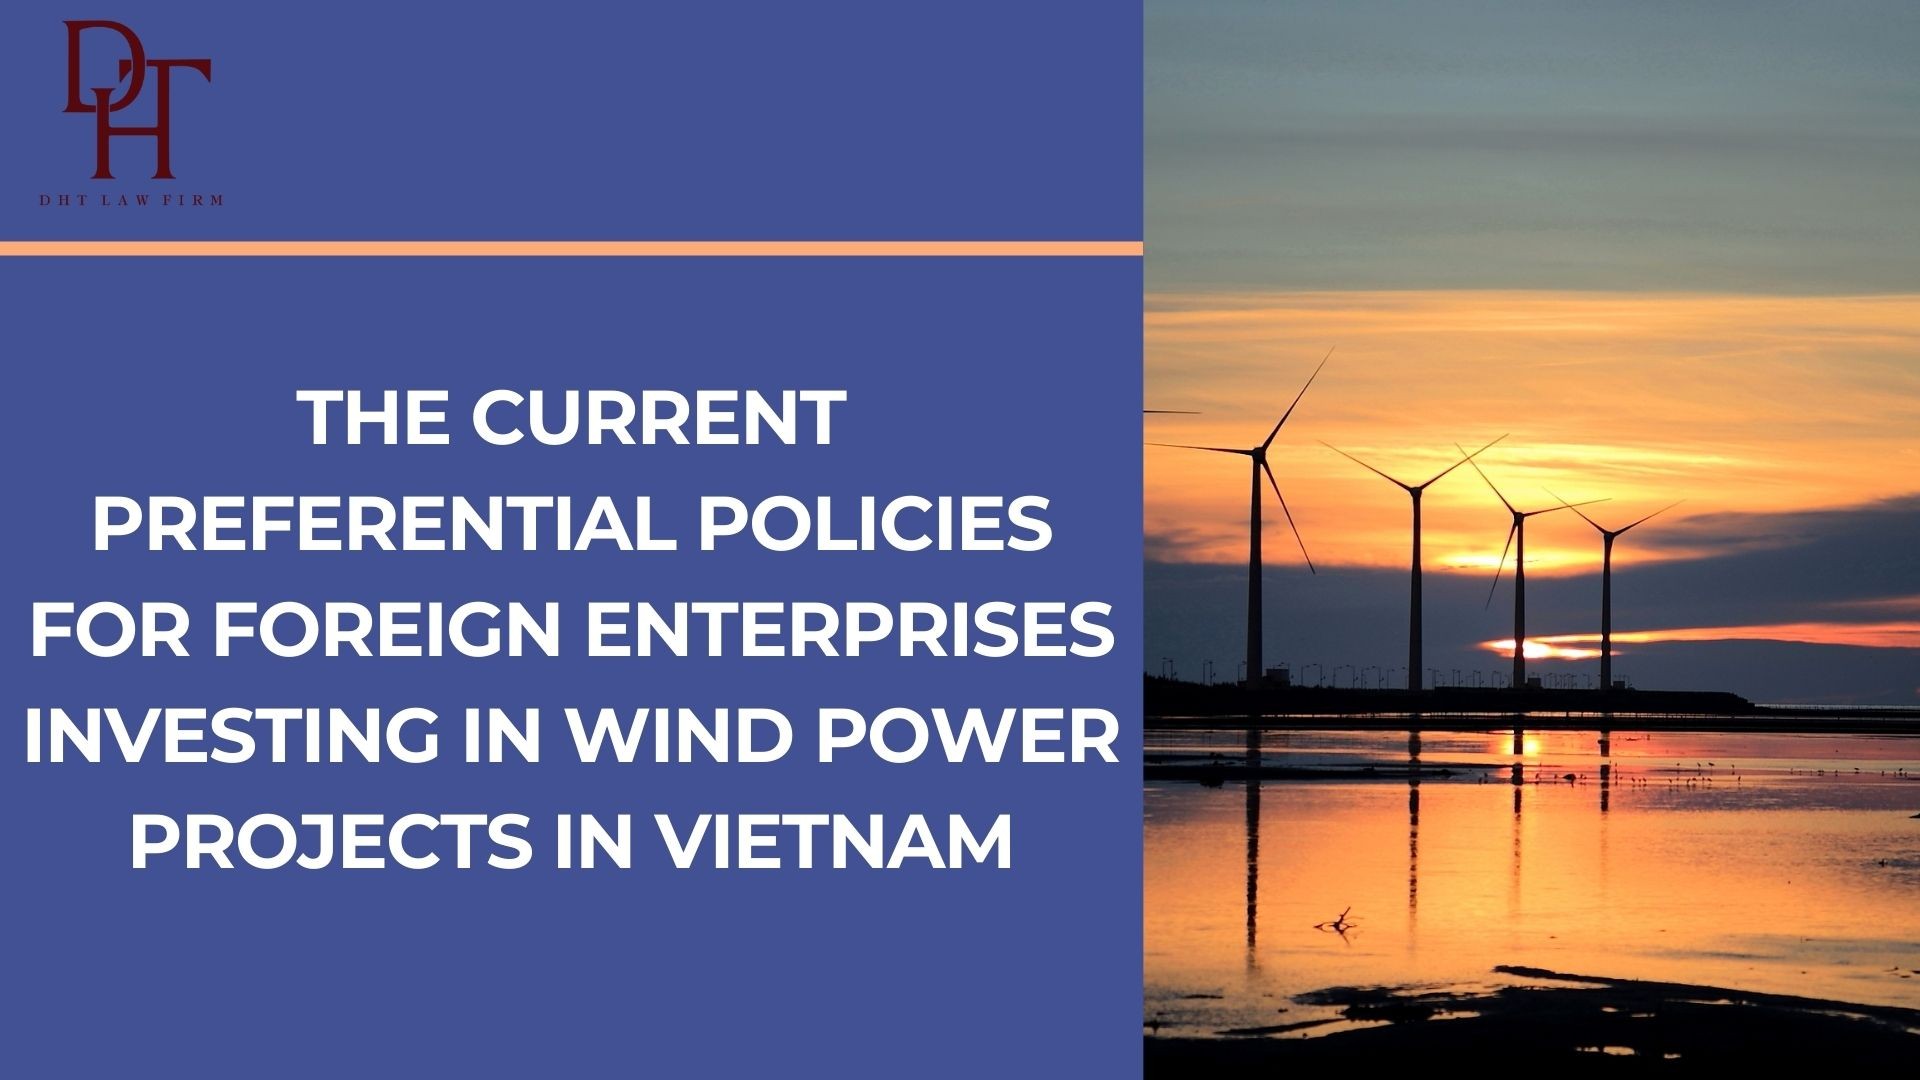 THE CURRENT PREFERENTIAL POLICIES FOR FOREIGN ENTERPRISES INVESTING IN WIND POWER PROJECTS IN VIETNAM